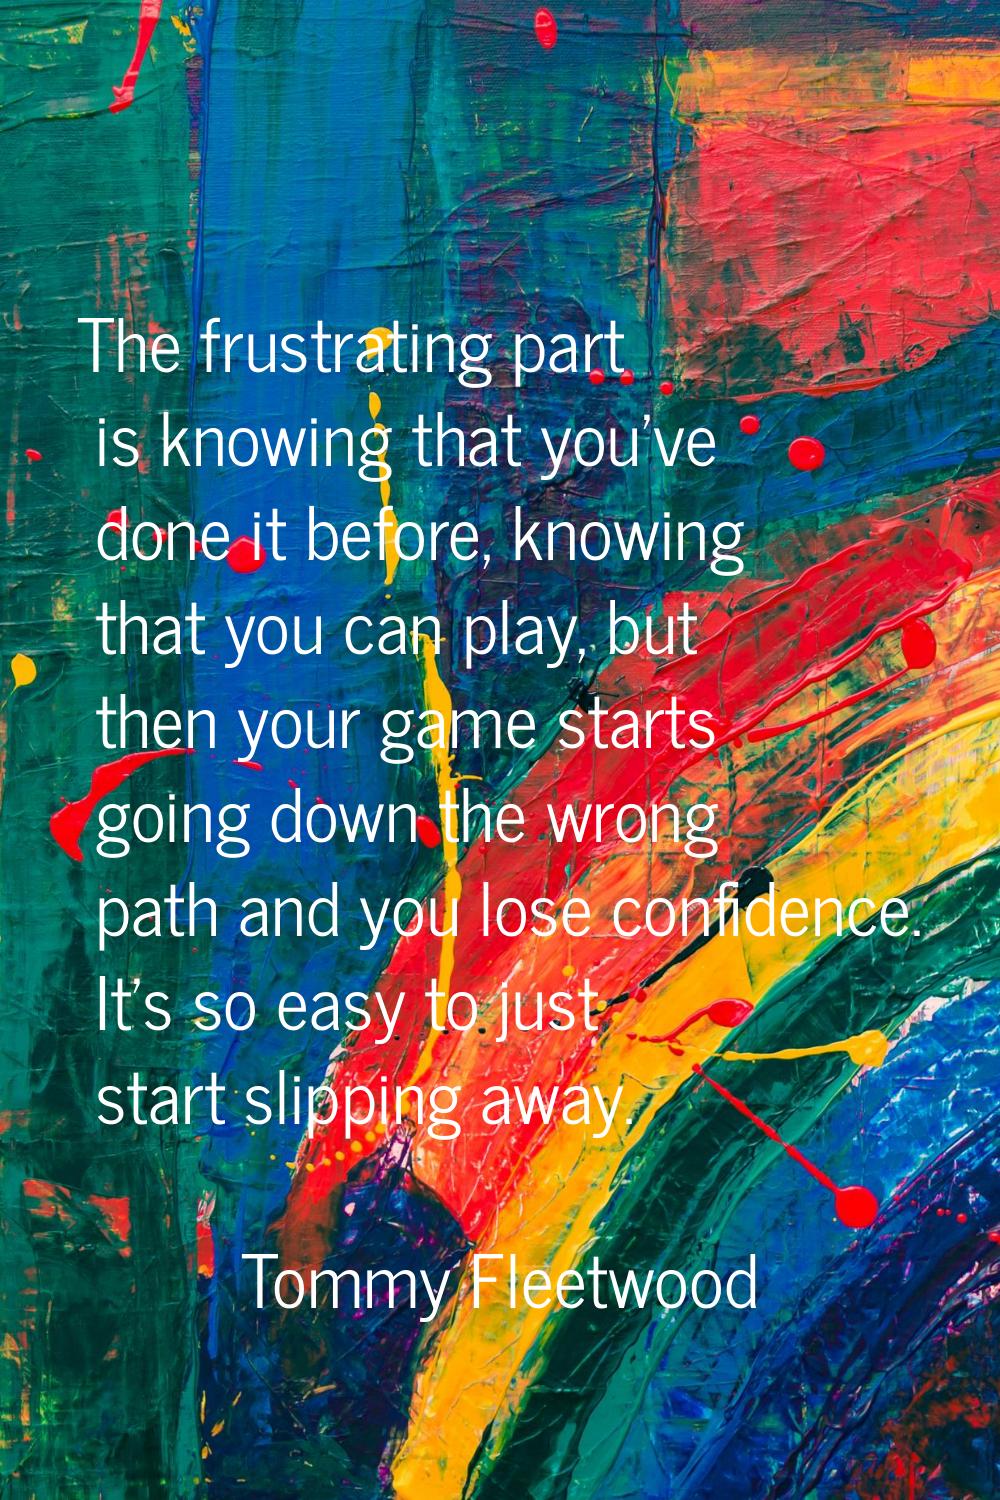 The frustrating part is knowing that you've done it before, knowing that you can play, but then you